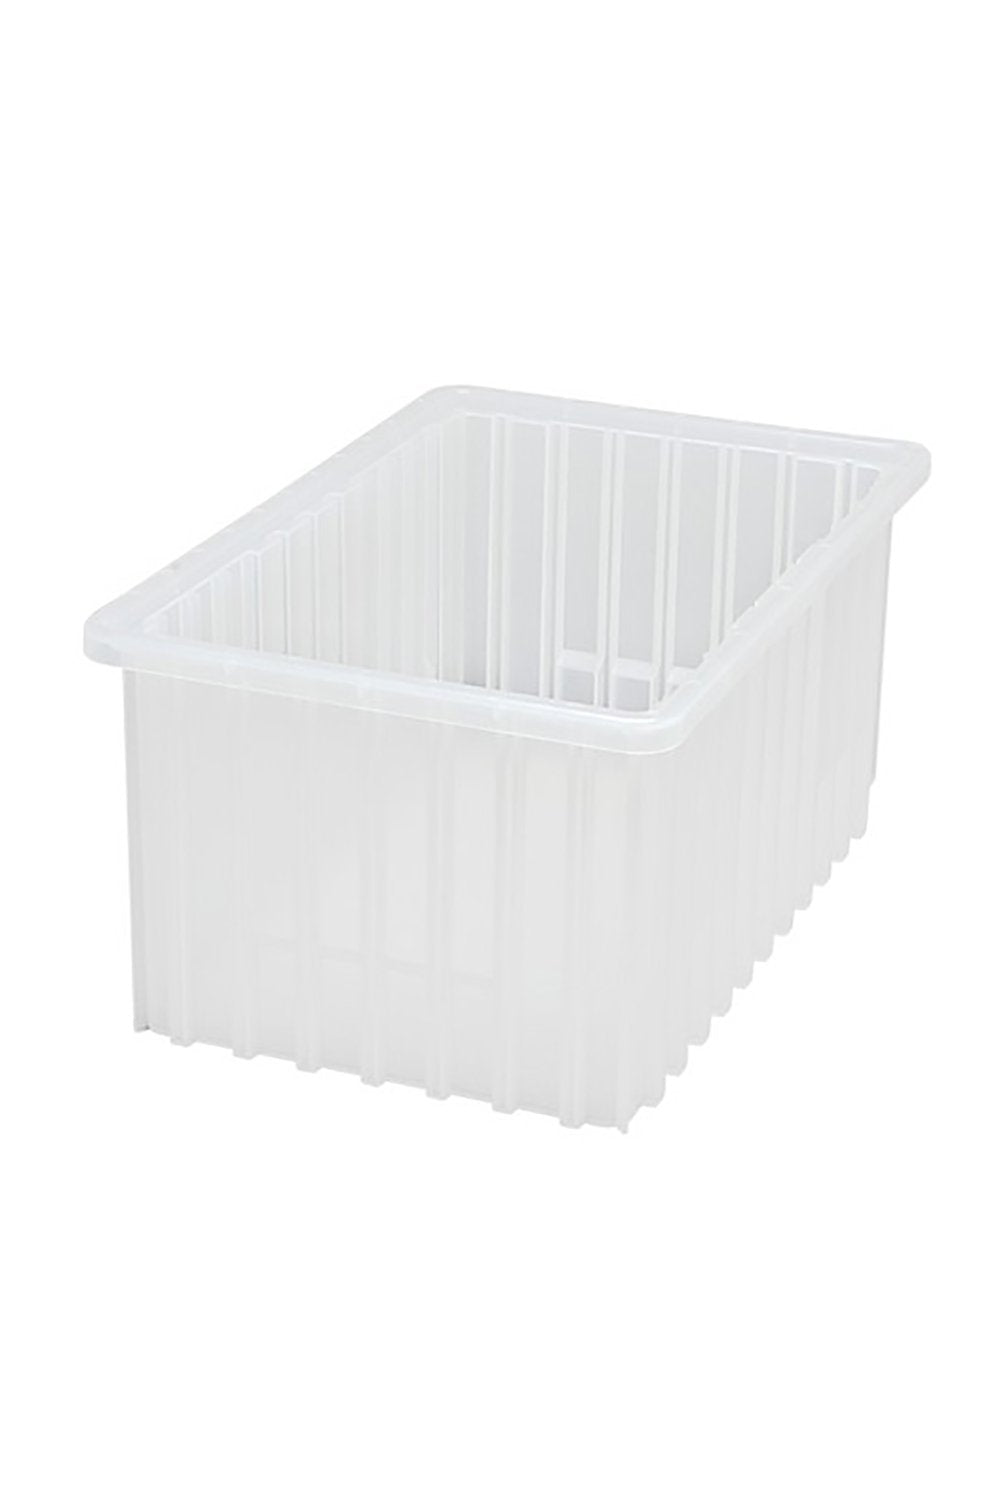 Clear View Dividable Grid Container Bins & Containers Acart 16-1/2"L x 10-7/8"W x 8"H Clear 